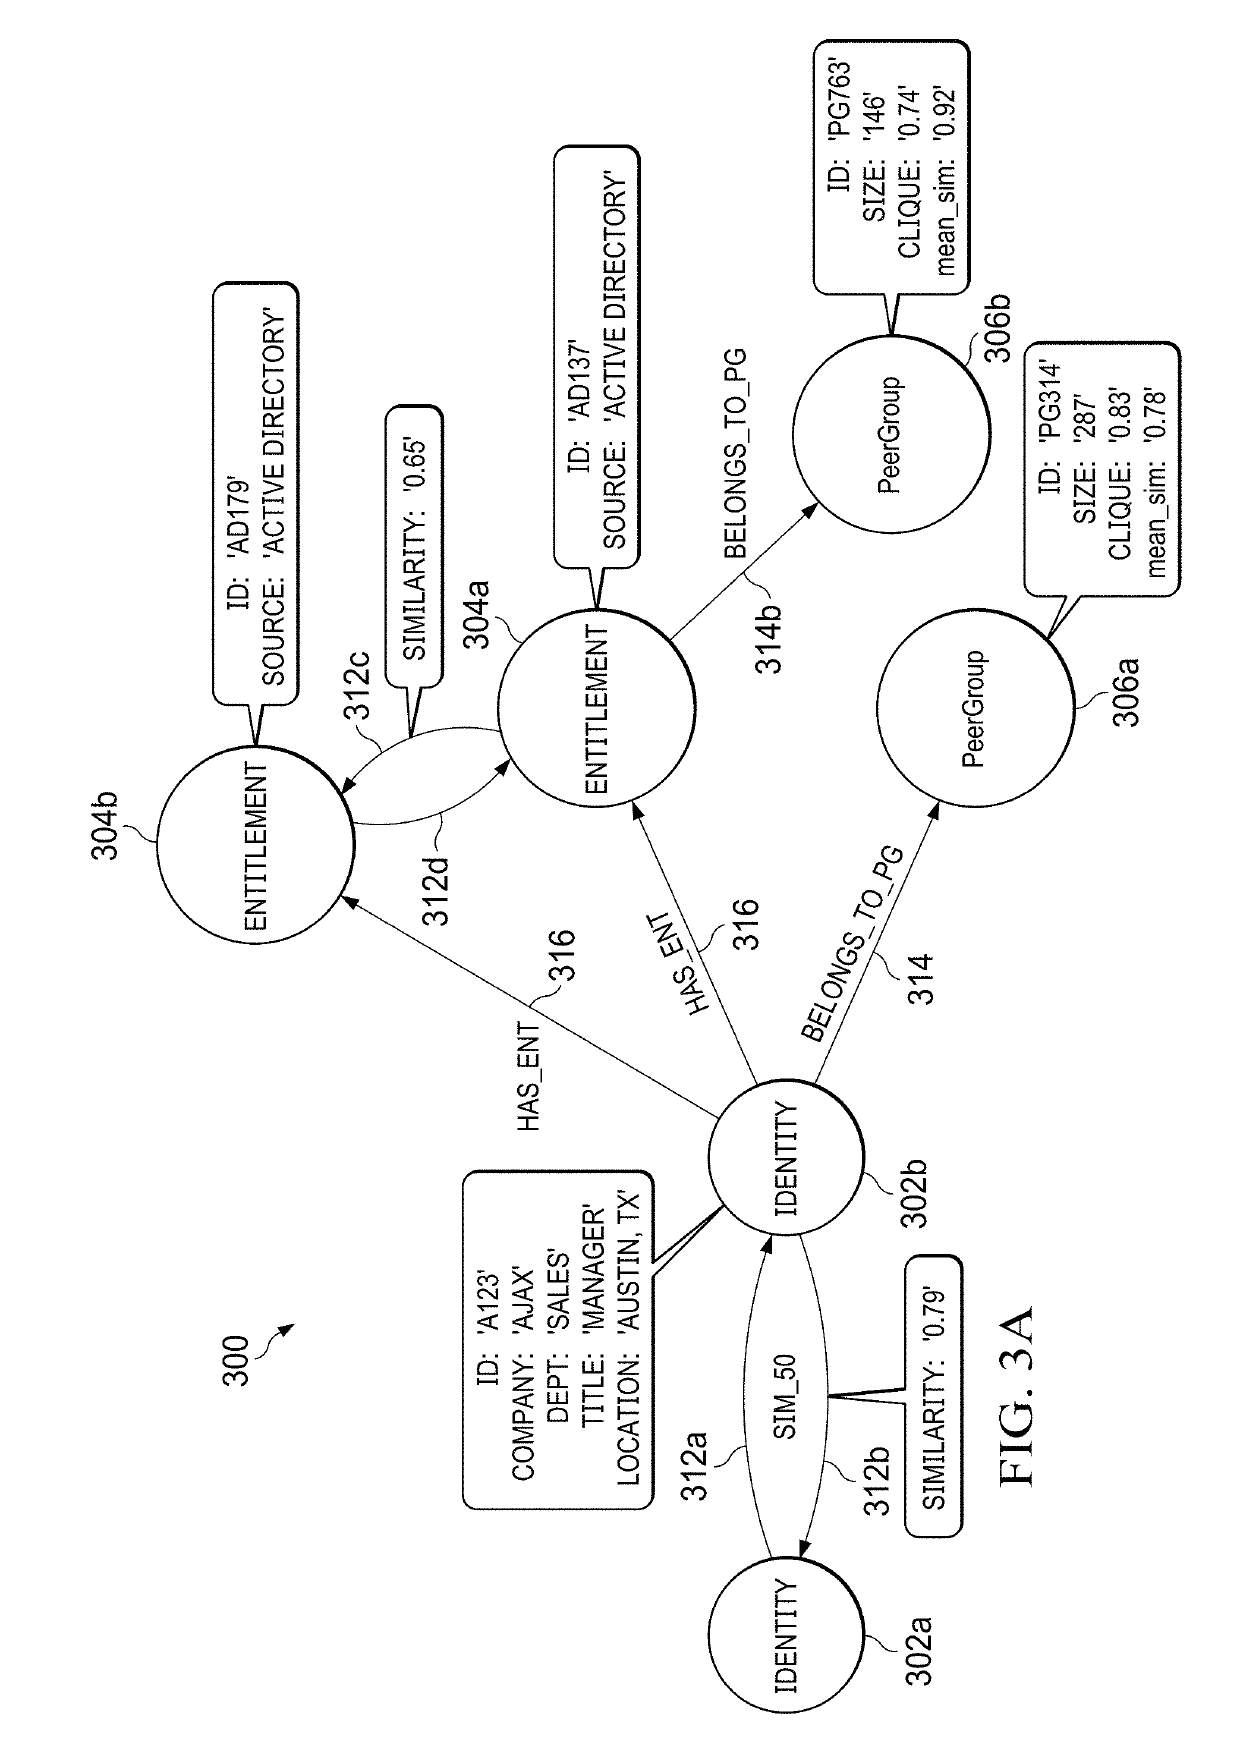 System and method for intelligent agents for decision support in network identity graph based identity management artificial intelligence systems